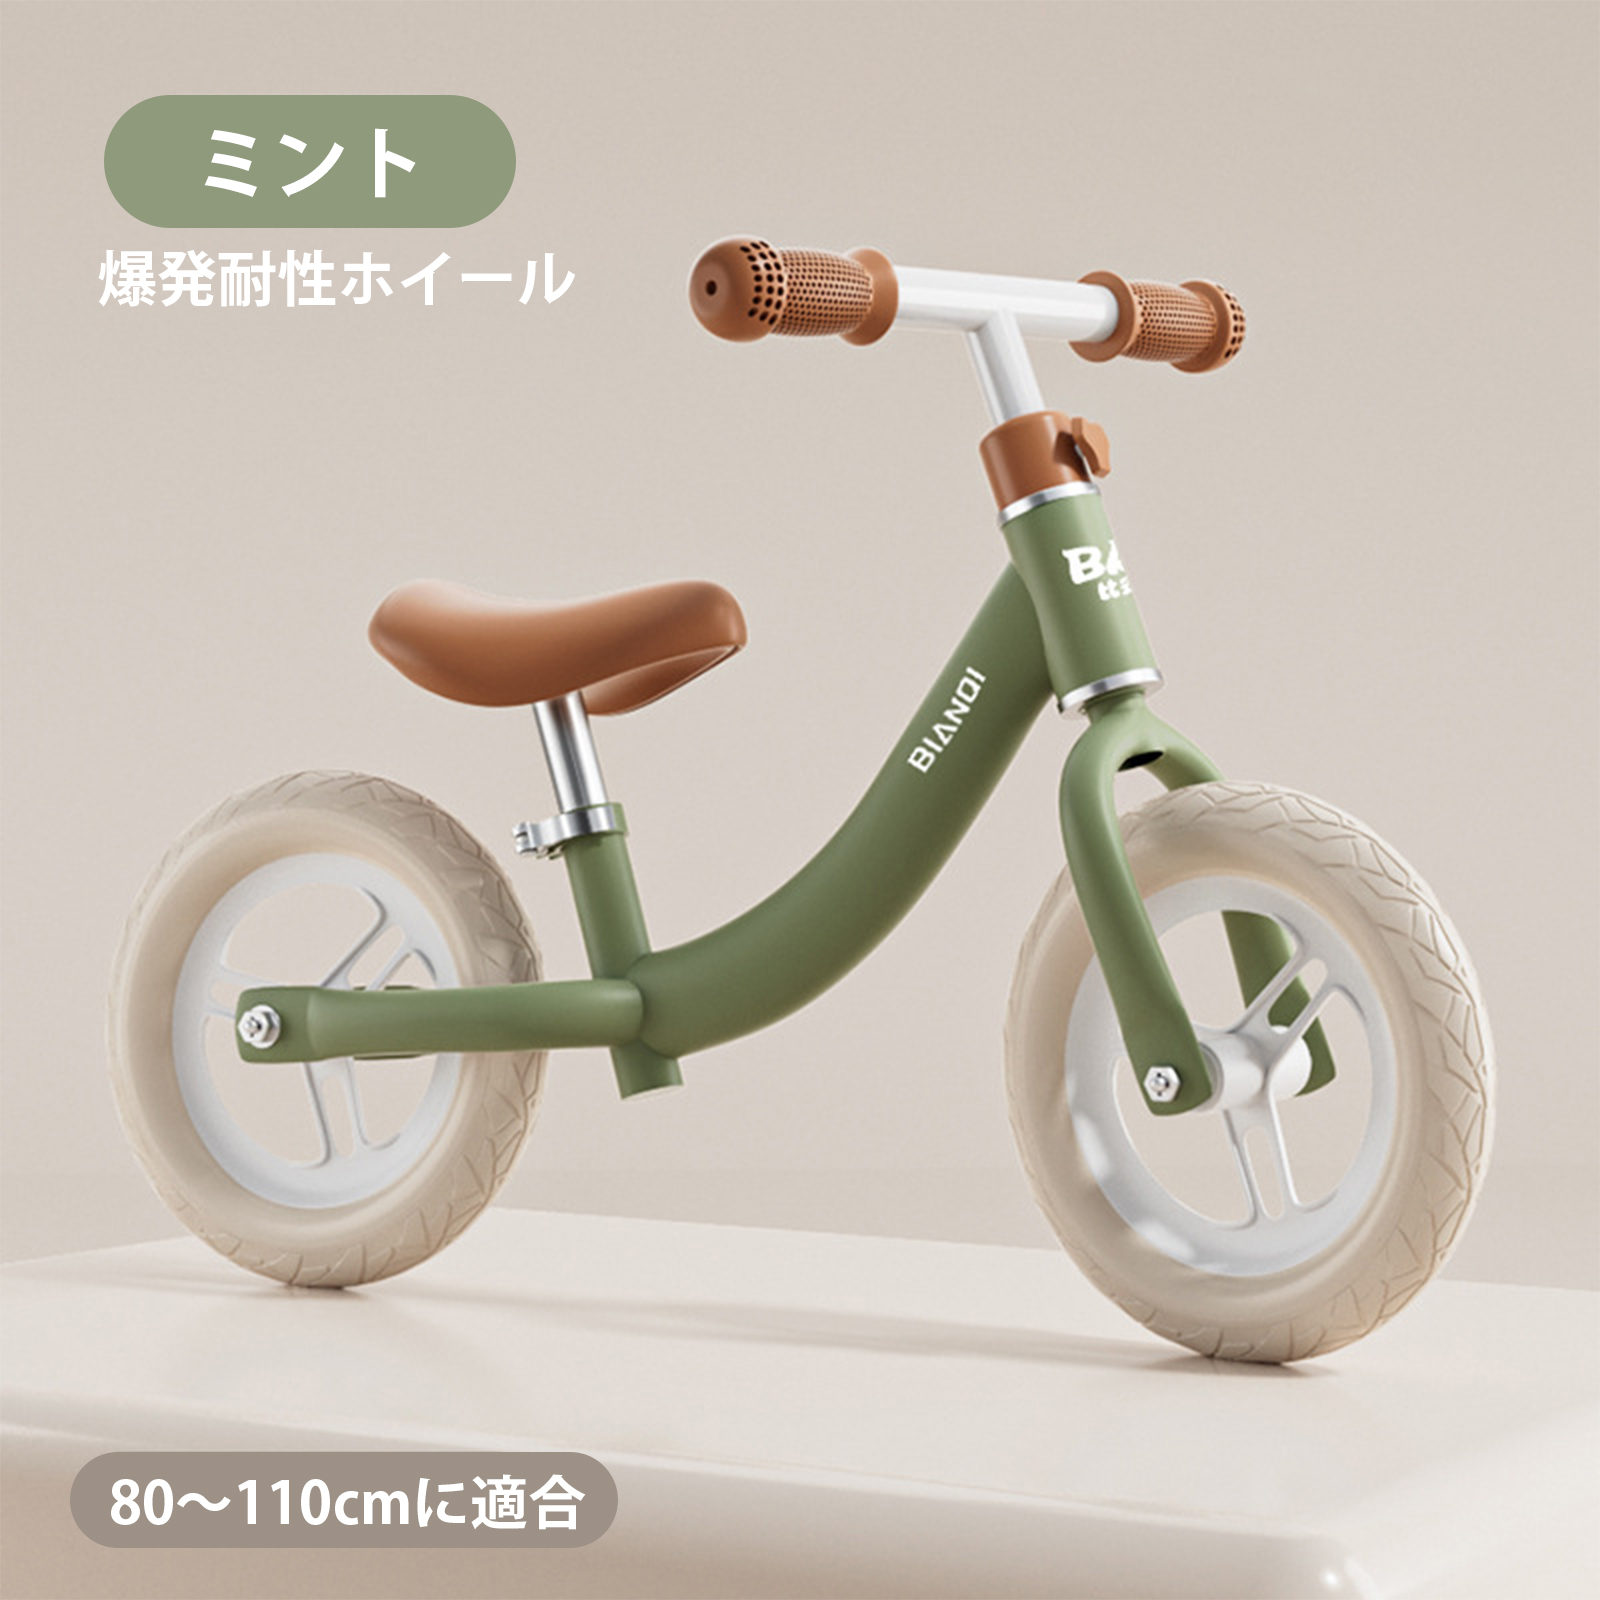 T12 Retro Green (explosion-proof wheels free of inflation)